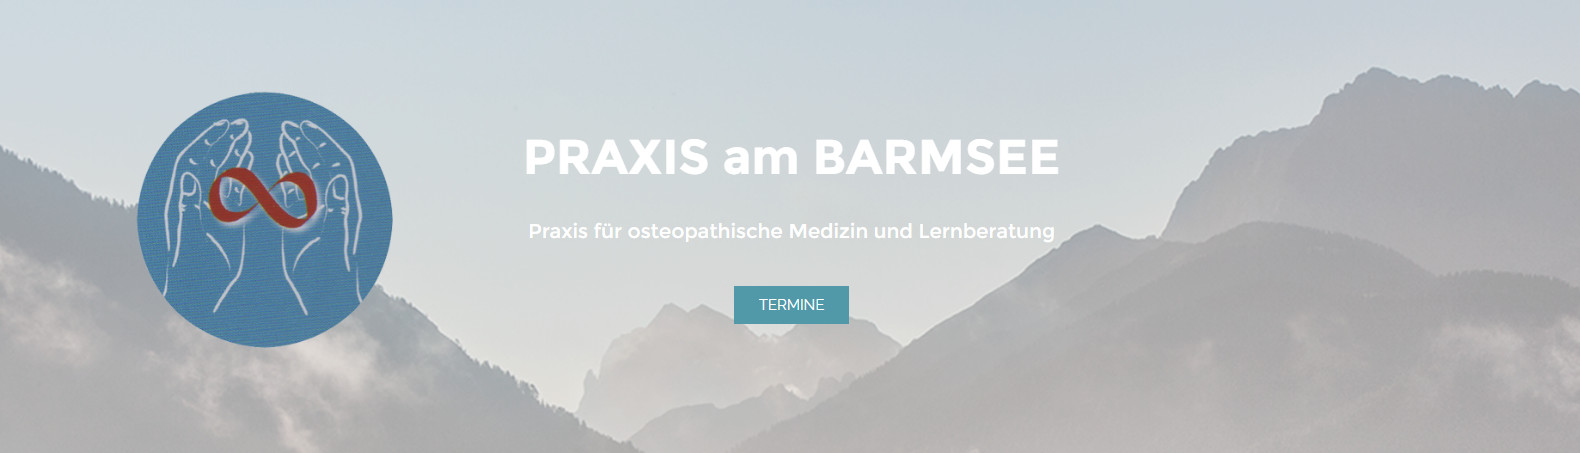 Osteopathie_am_Barmsee